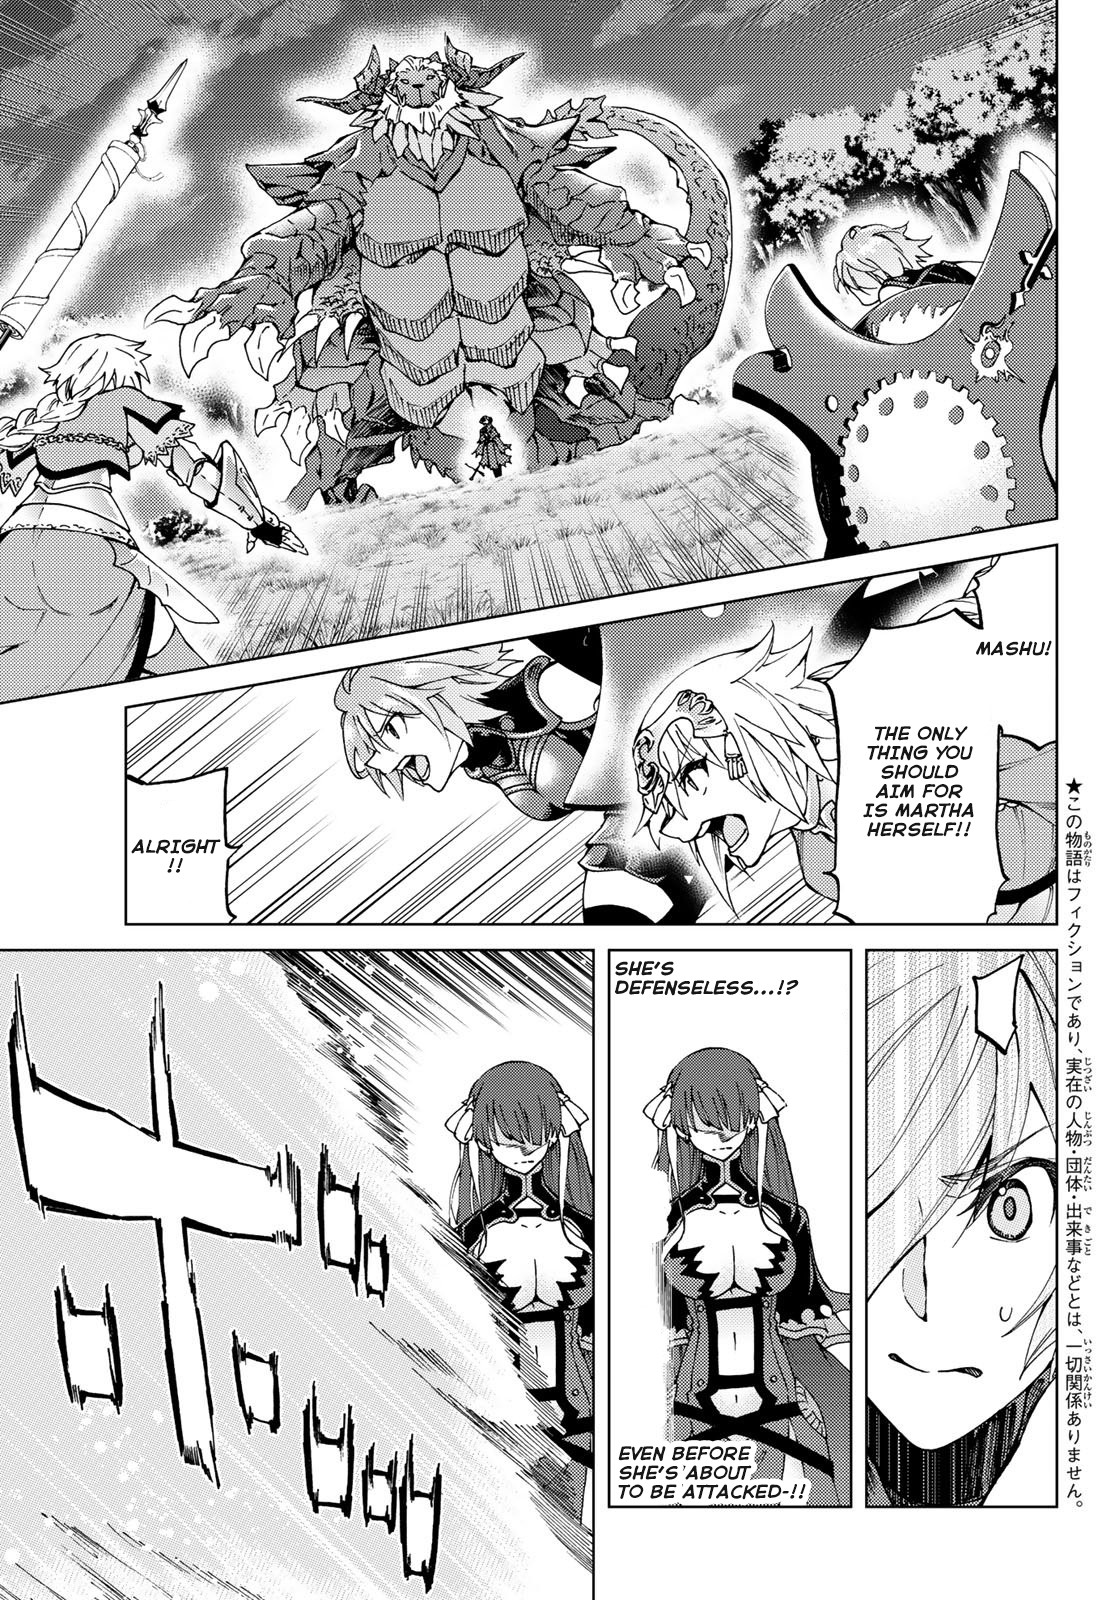 Fate/grand Order -Turas Réalta- - Page 3